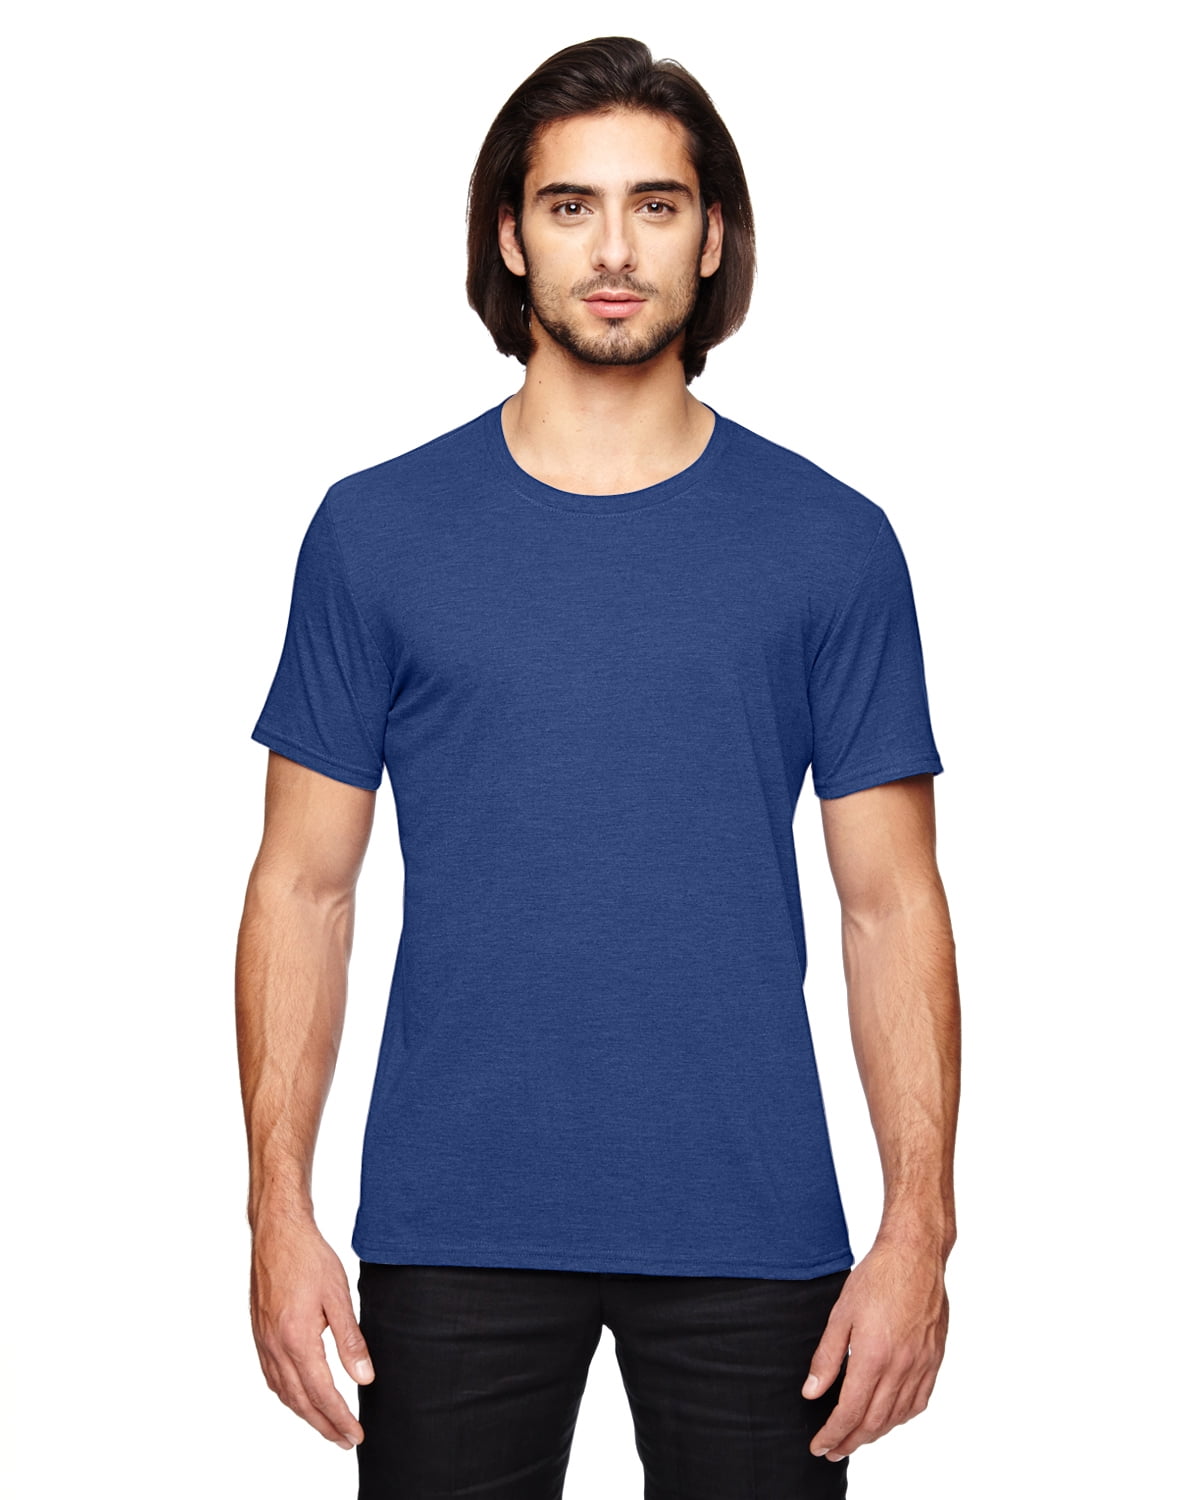 Regular BLUE Poly-Cotton-rayon Double Men\'s Tee JustBlanks Jersey Short Sleeves Tri-Blend - T HEATHER Neck - for Sleeve Tee Crew Men 3X-Large Shirt Needle